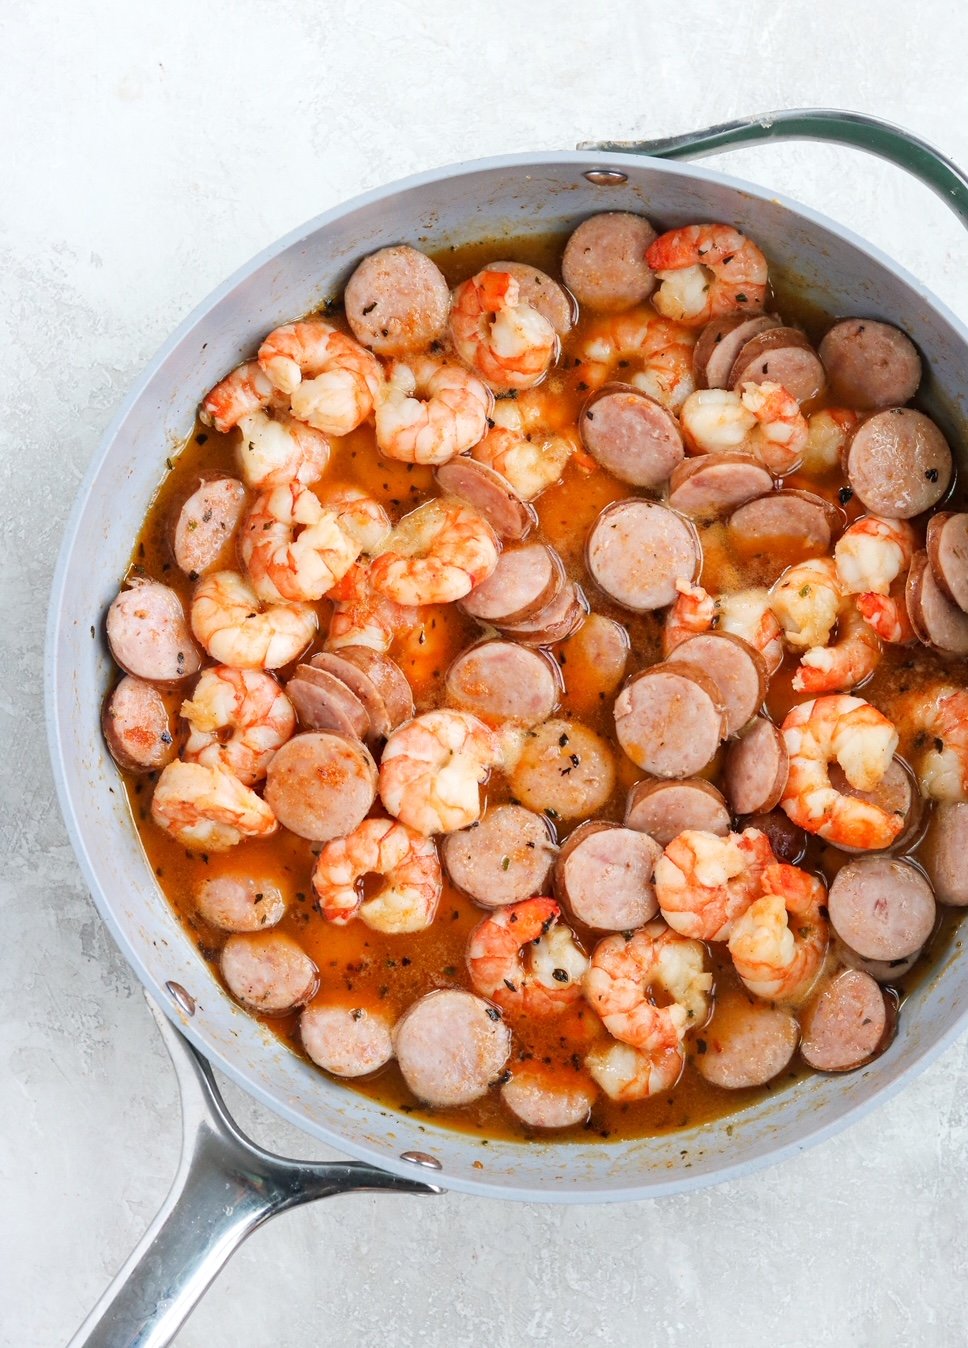 Shrimp and sausage in a creole gravy